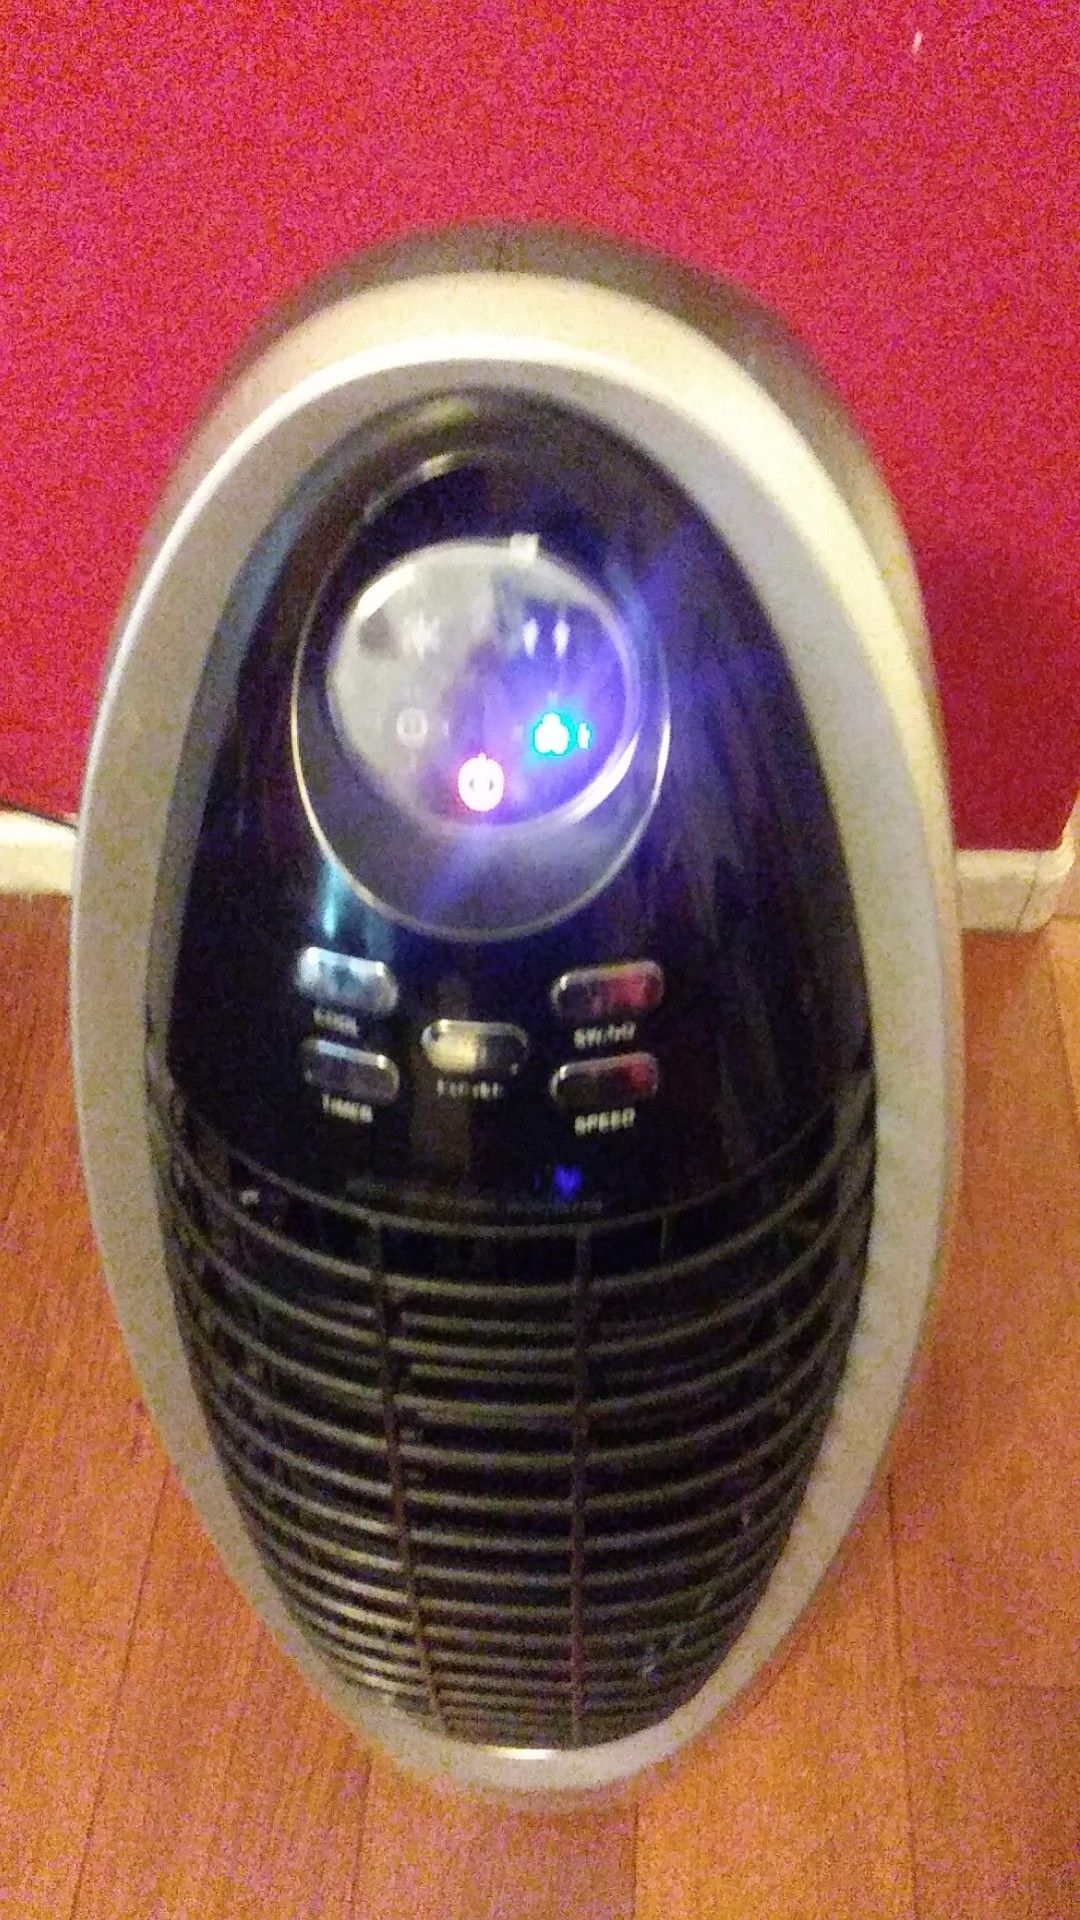 Honeywell portable AC unit put water or ice gets very cold